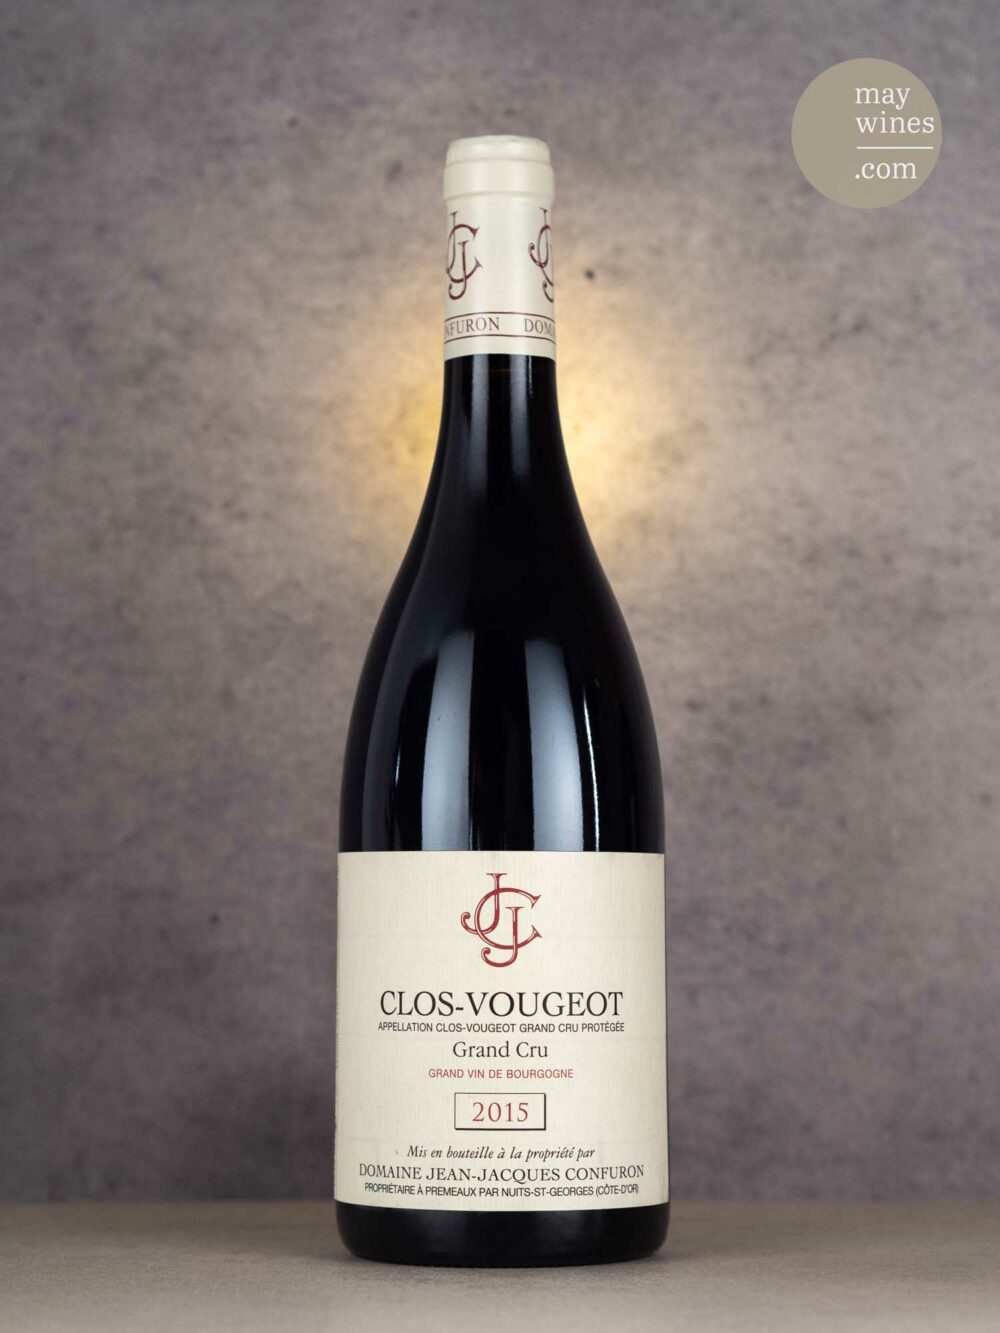 May Wines – Rotwein – 2015 Clos-Vougeot Grand Cru - Domaine Jean Jacques Confuron